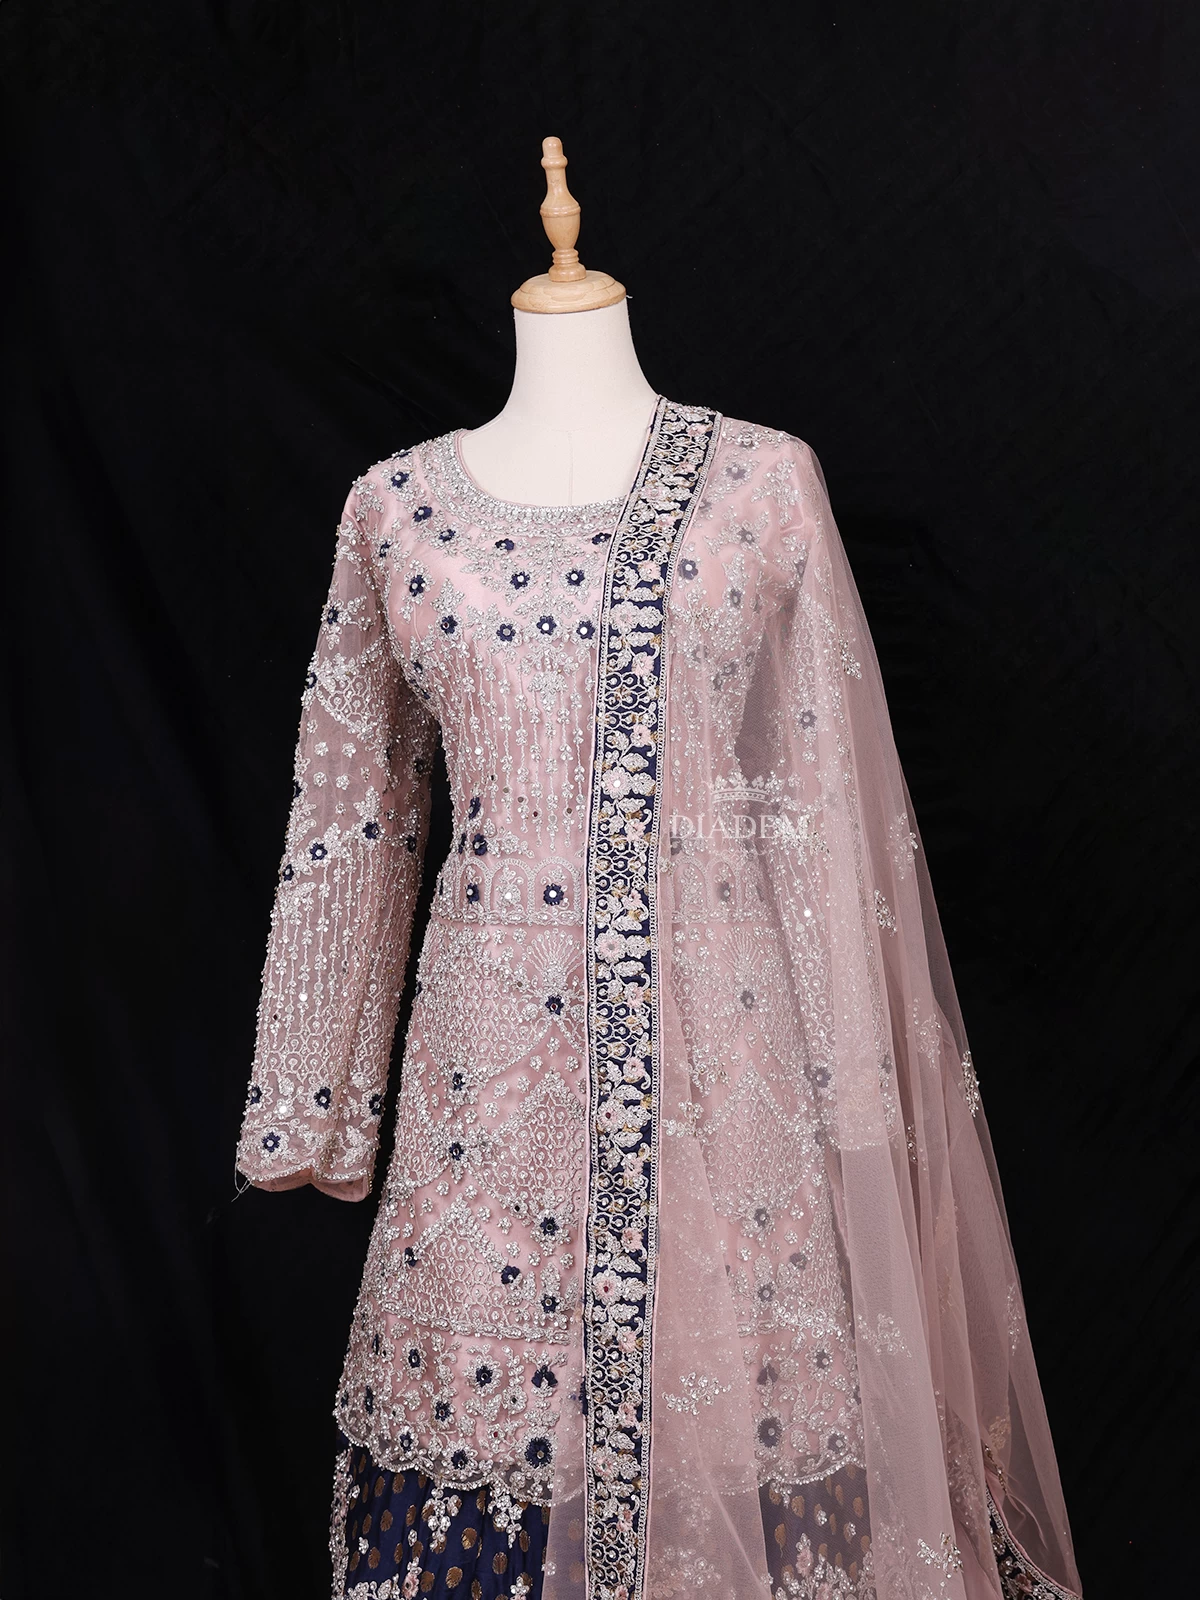 Pink Party Wear Lehenga Embellished With Sequins And Stones Designs Paired With Dupatta